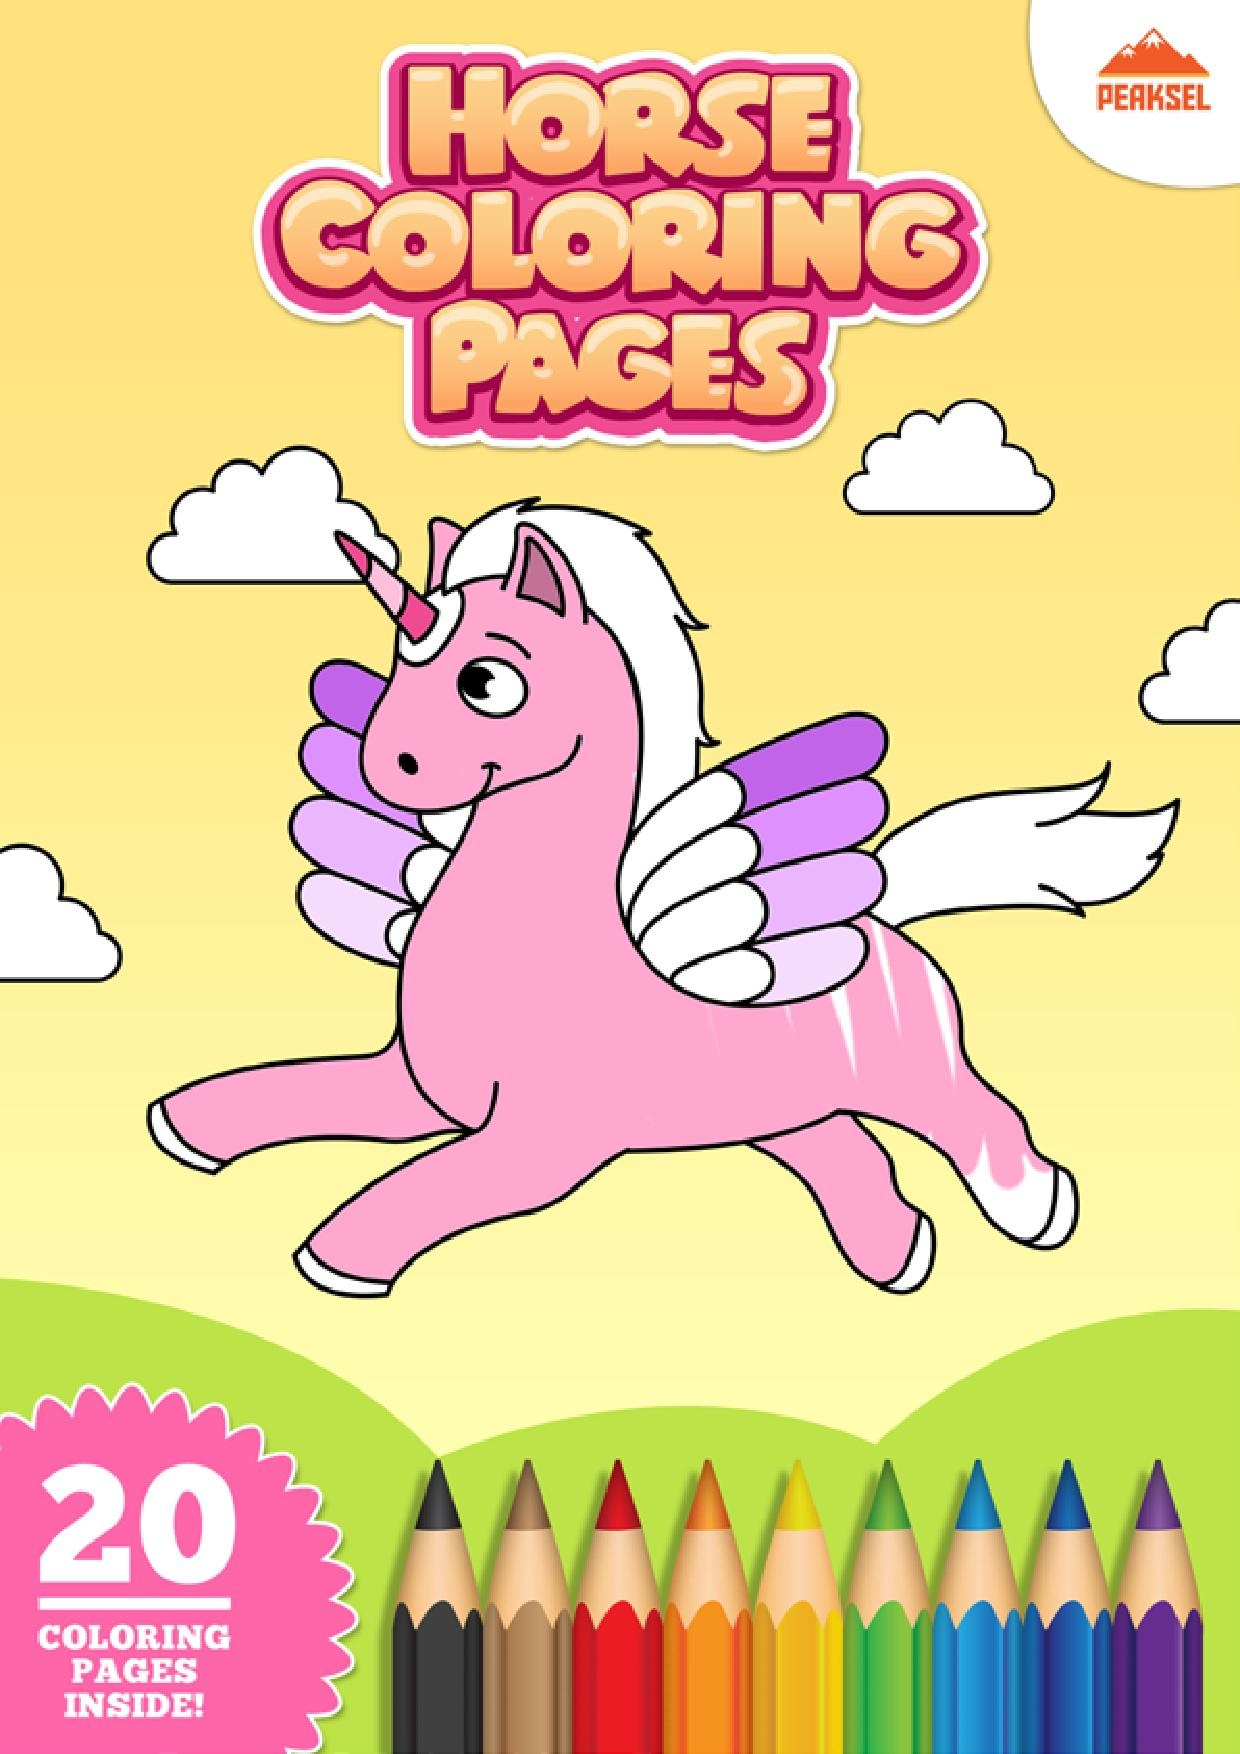 Pdf Coloring Pages For Kids Filehorse Coloring Pages Printable Coloring Book For Kidspdf